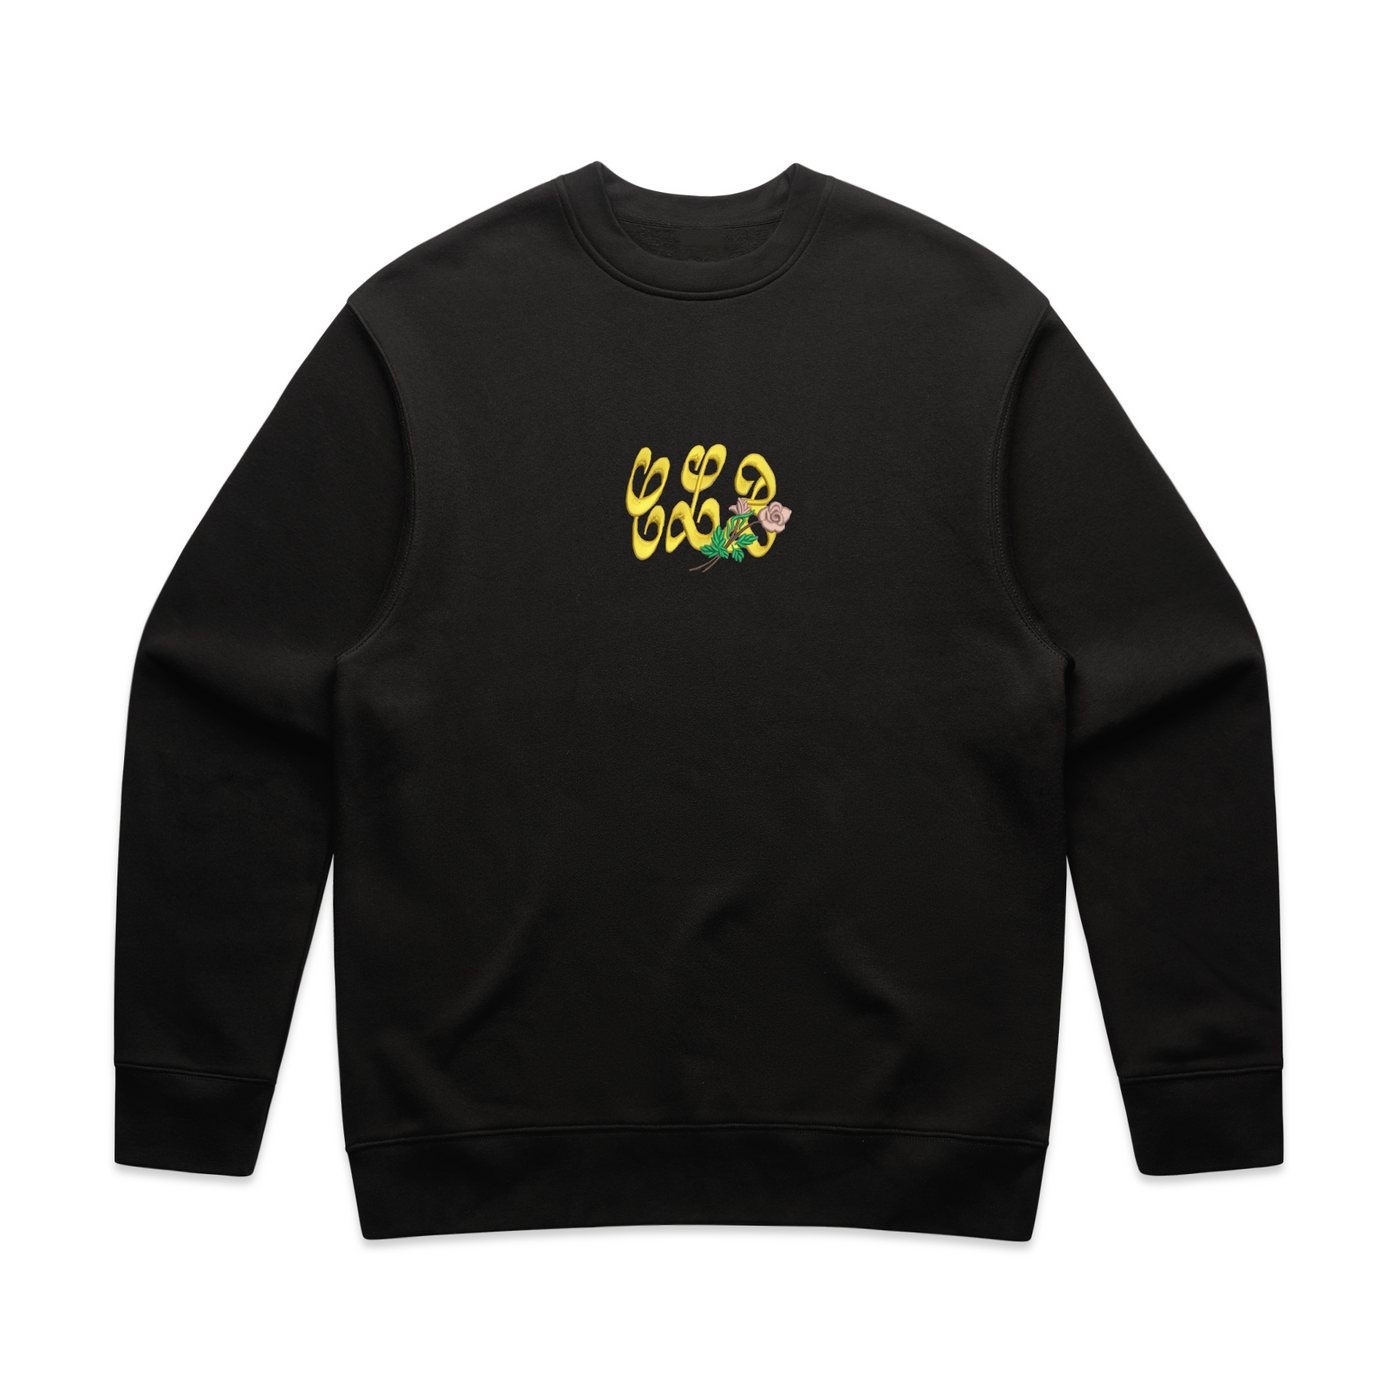 Embroidered CLB Crewneck